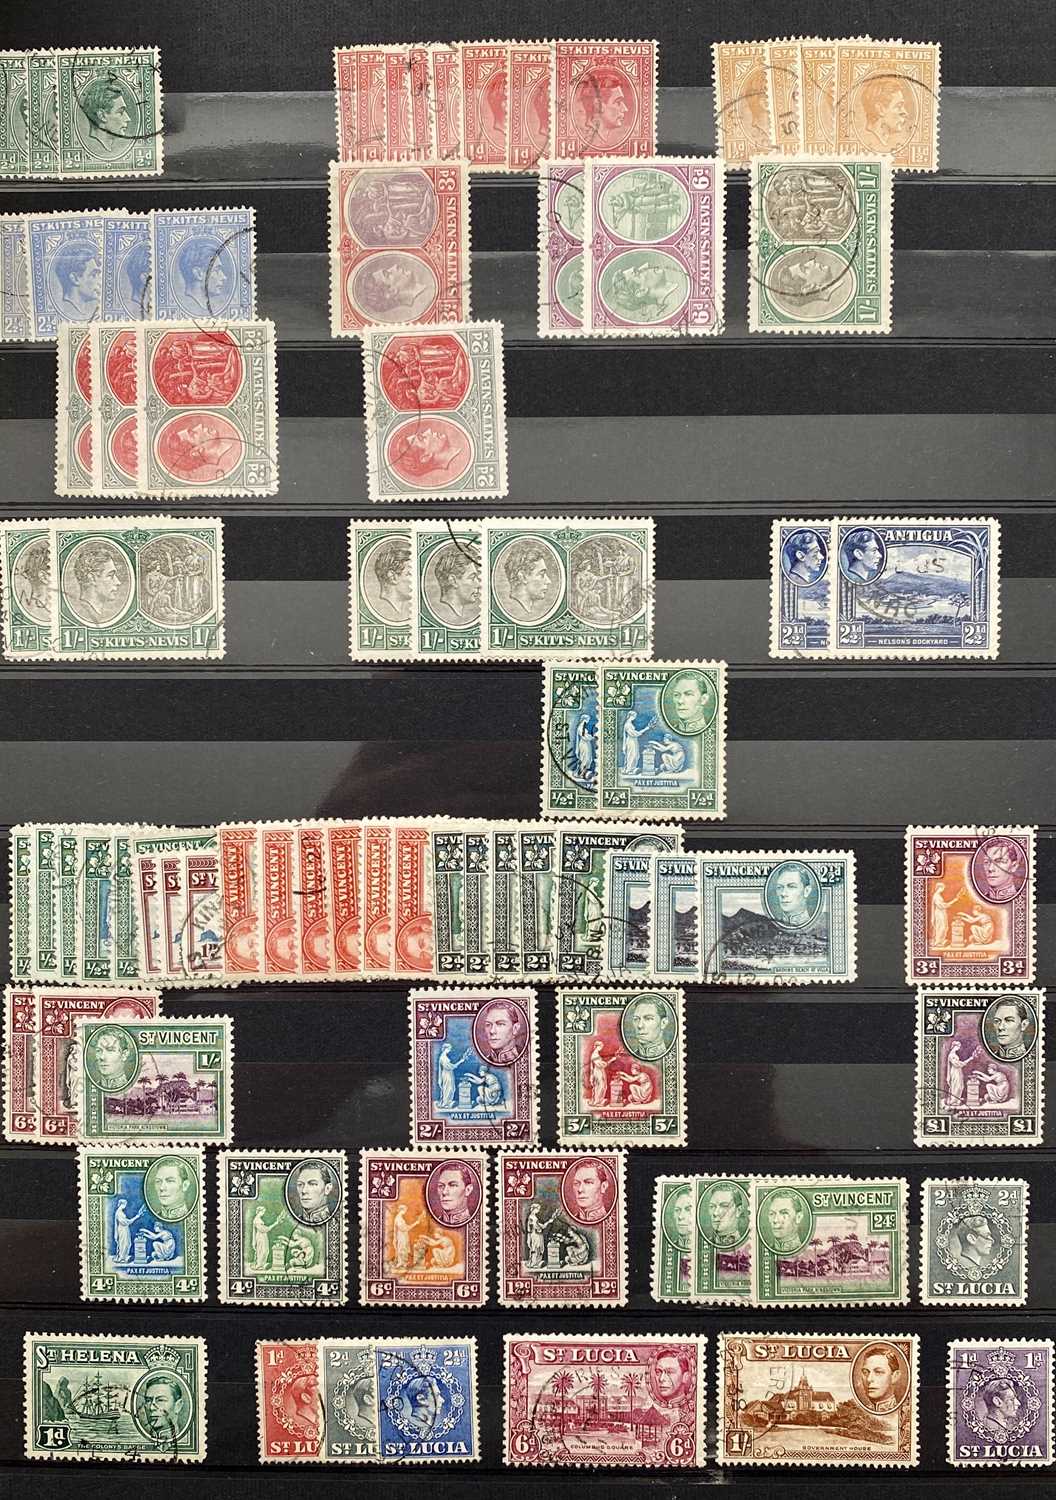 COMMONWEALTH GV1 - fine used collection of many countries, full sets and top values, good quality - Image 16 of 17